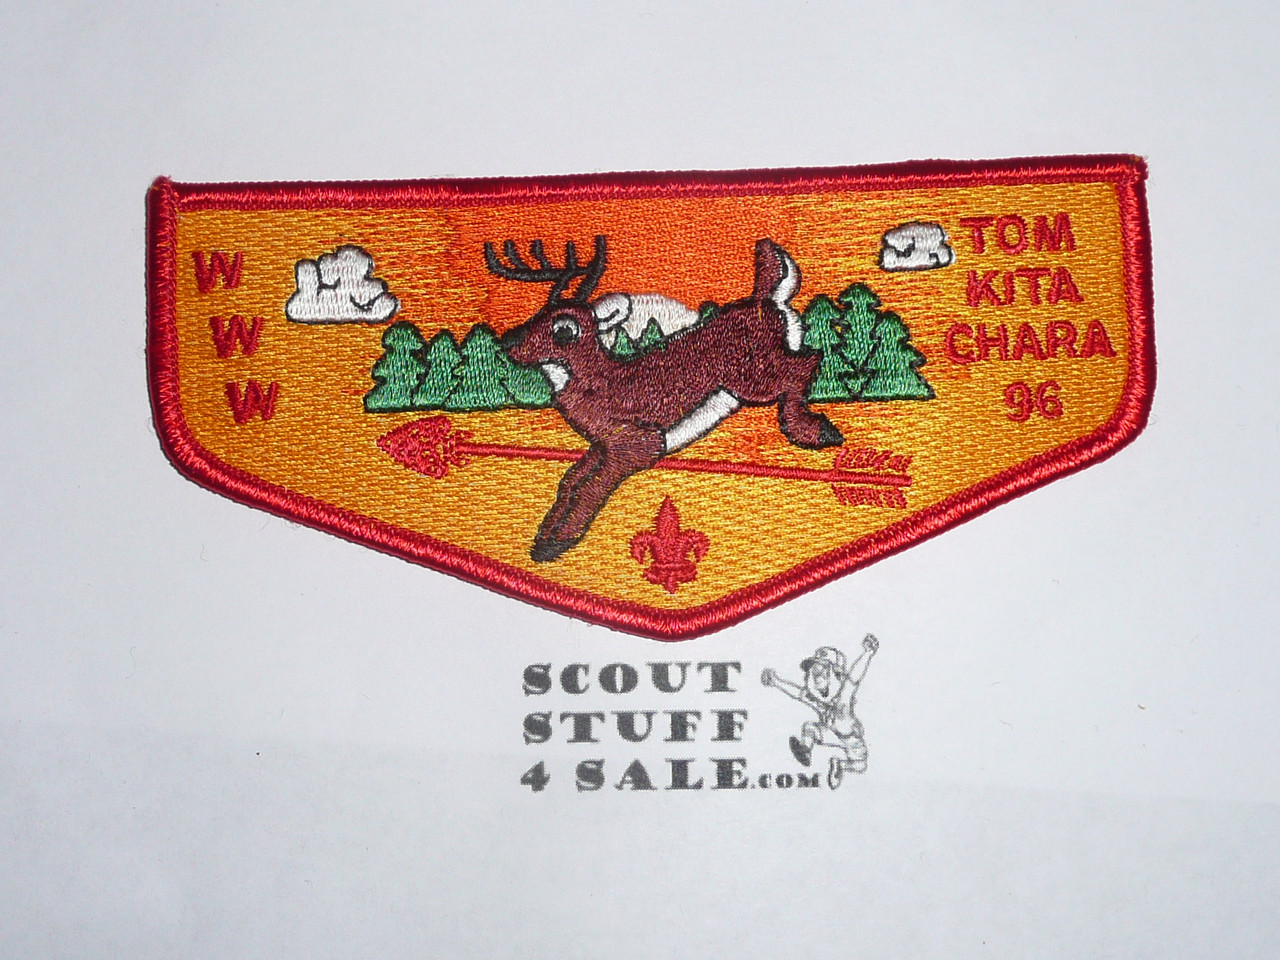 Order of the Arrow Lodge #96 Tom Kita Chara s16 Flap Patch